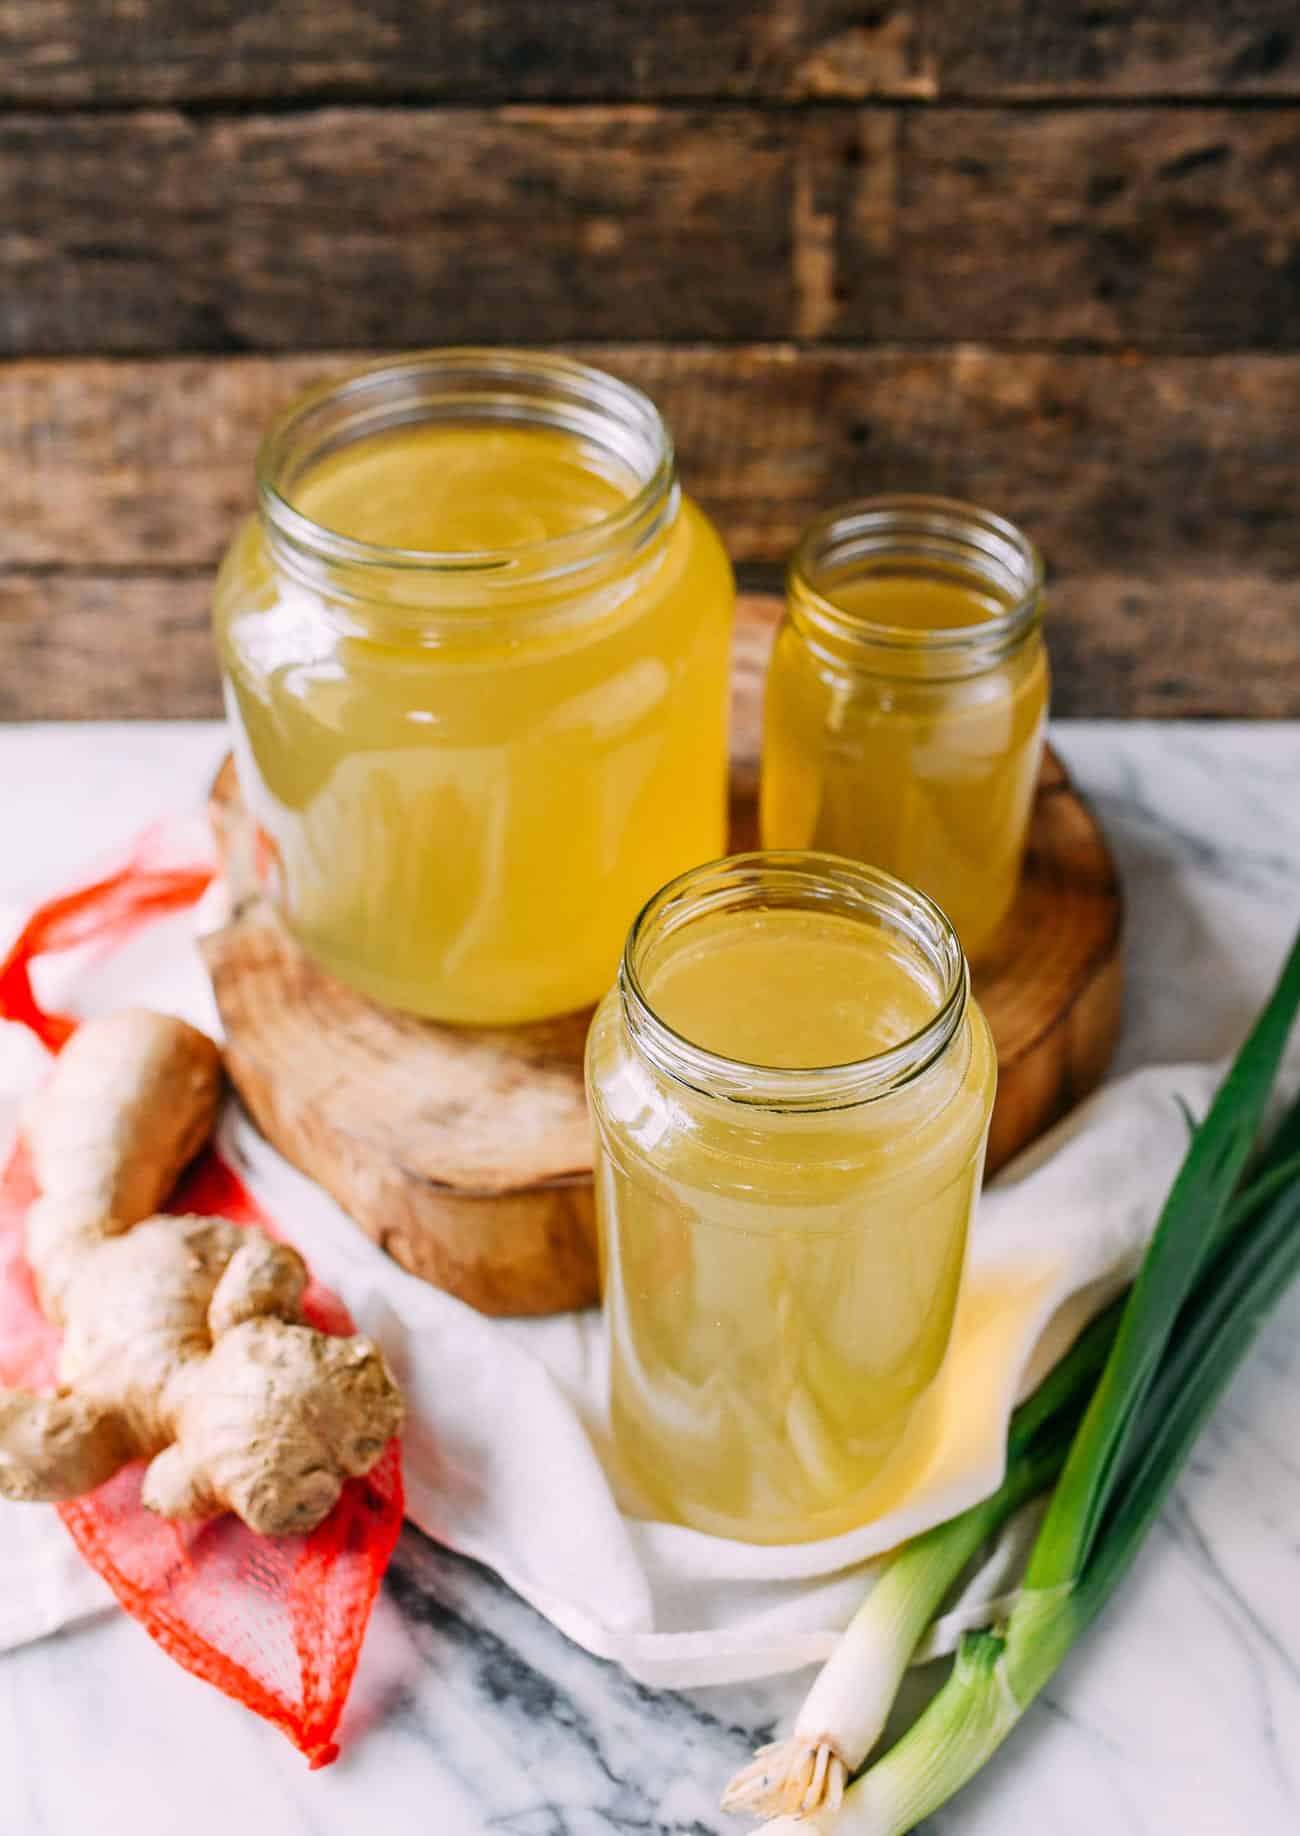 Two jars of ginger juice on a wooden board.